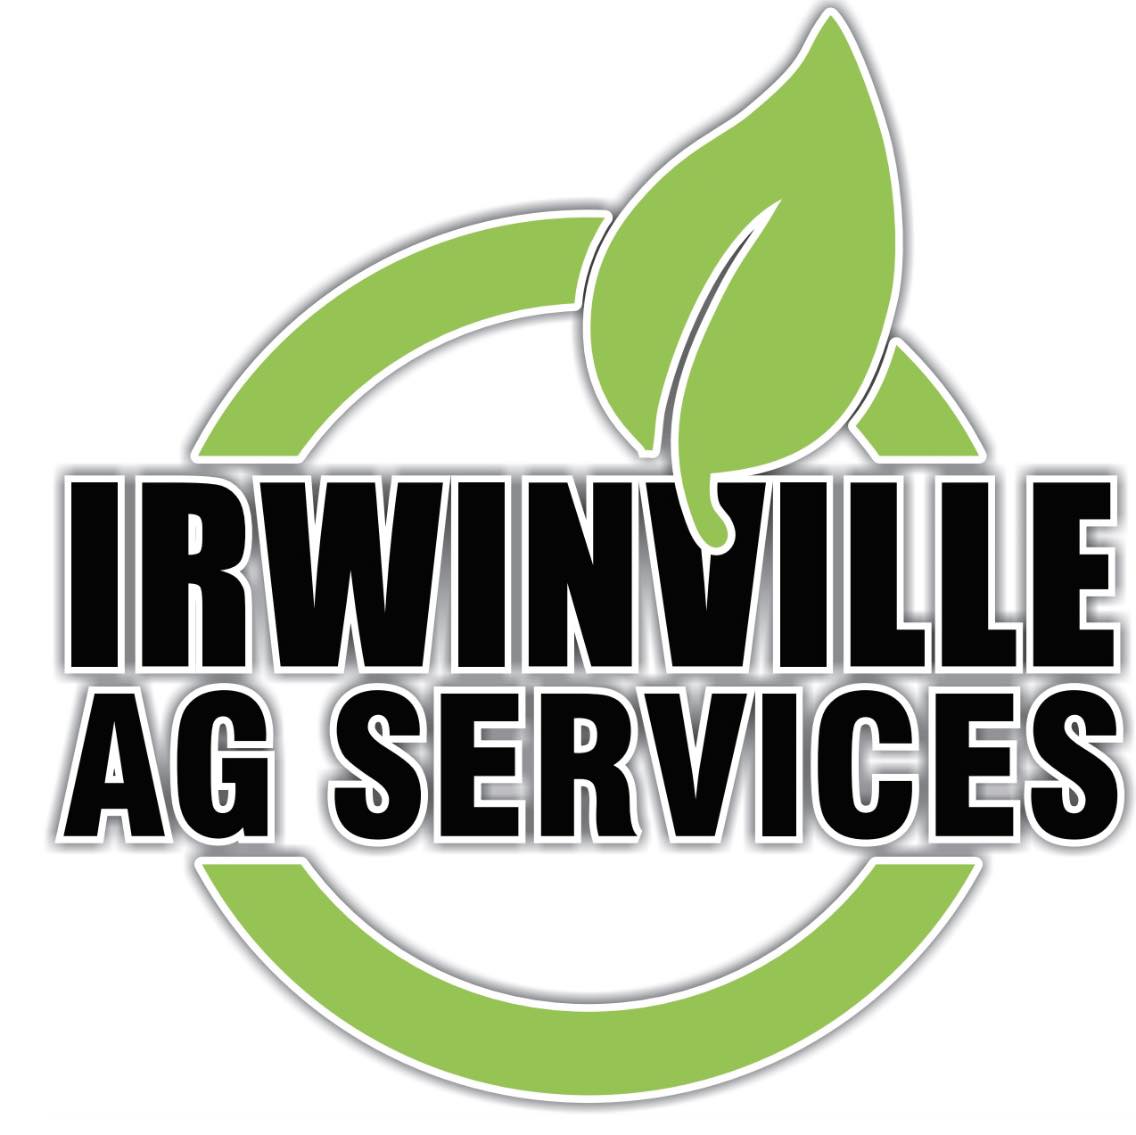 Irwin Ag Services, Inc.